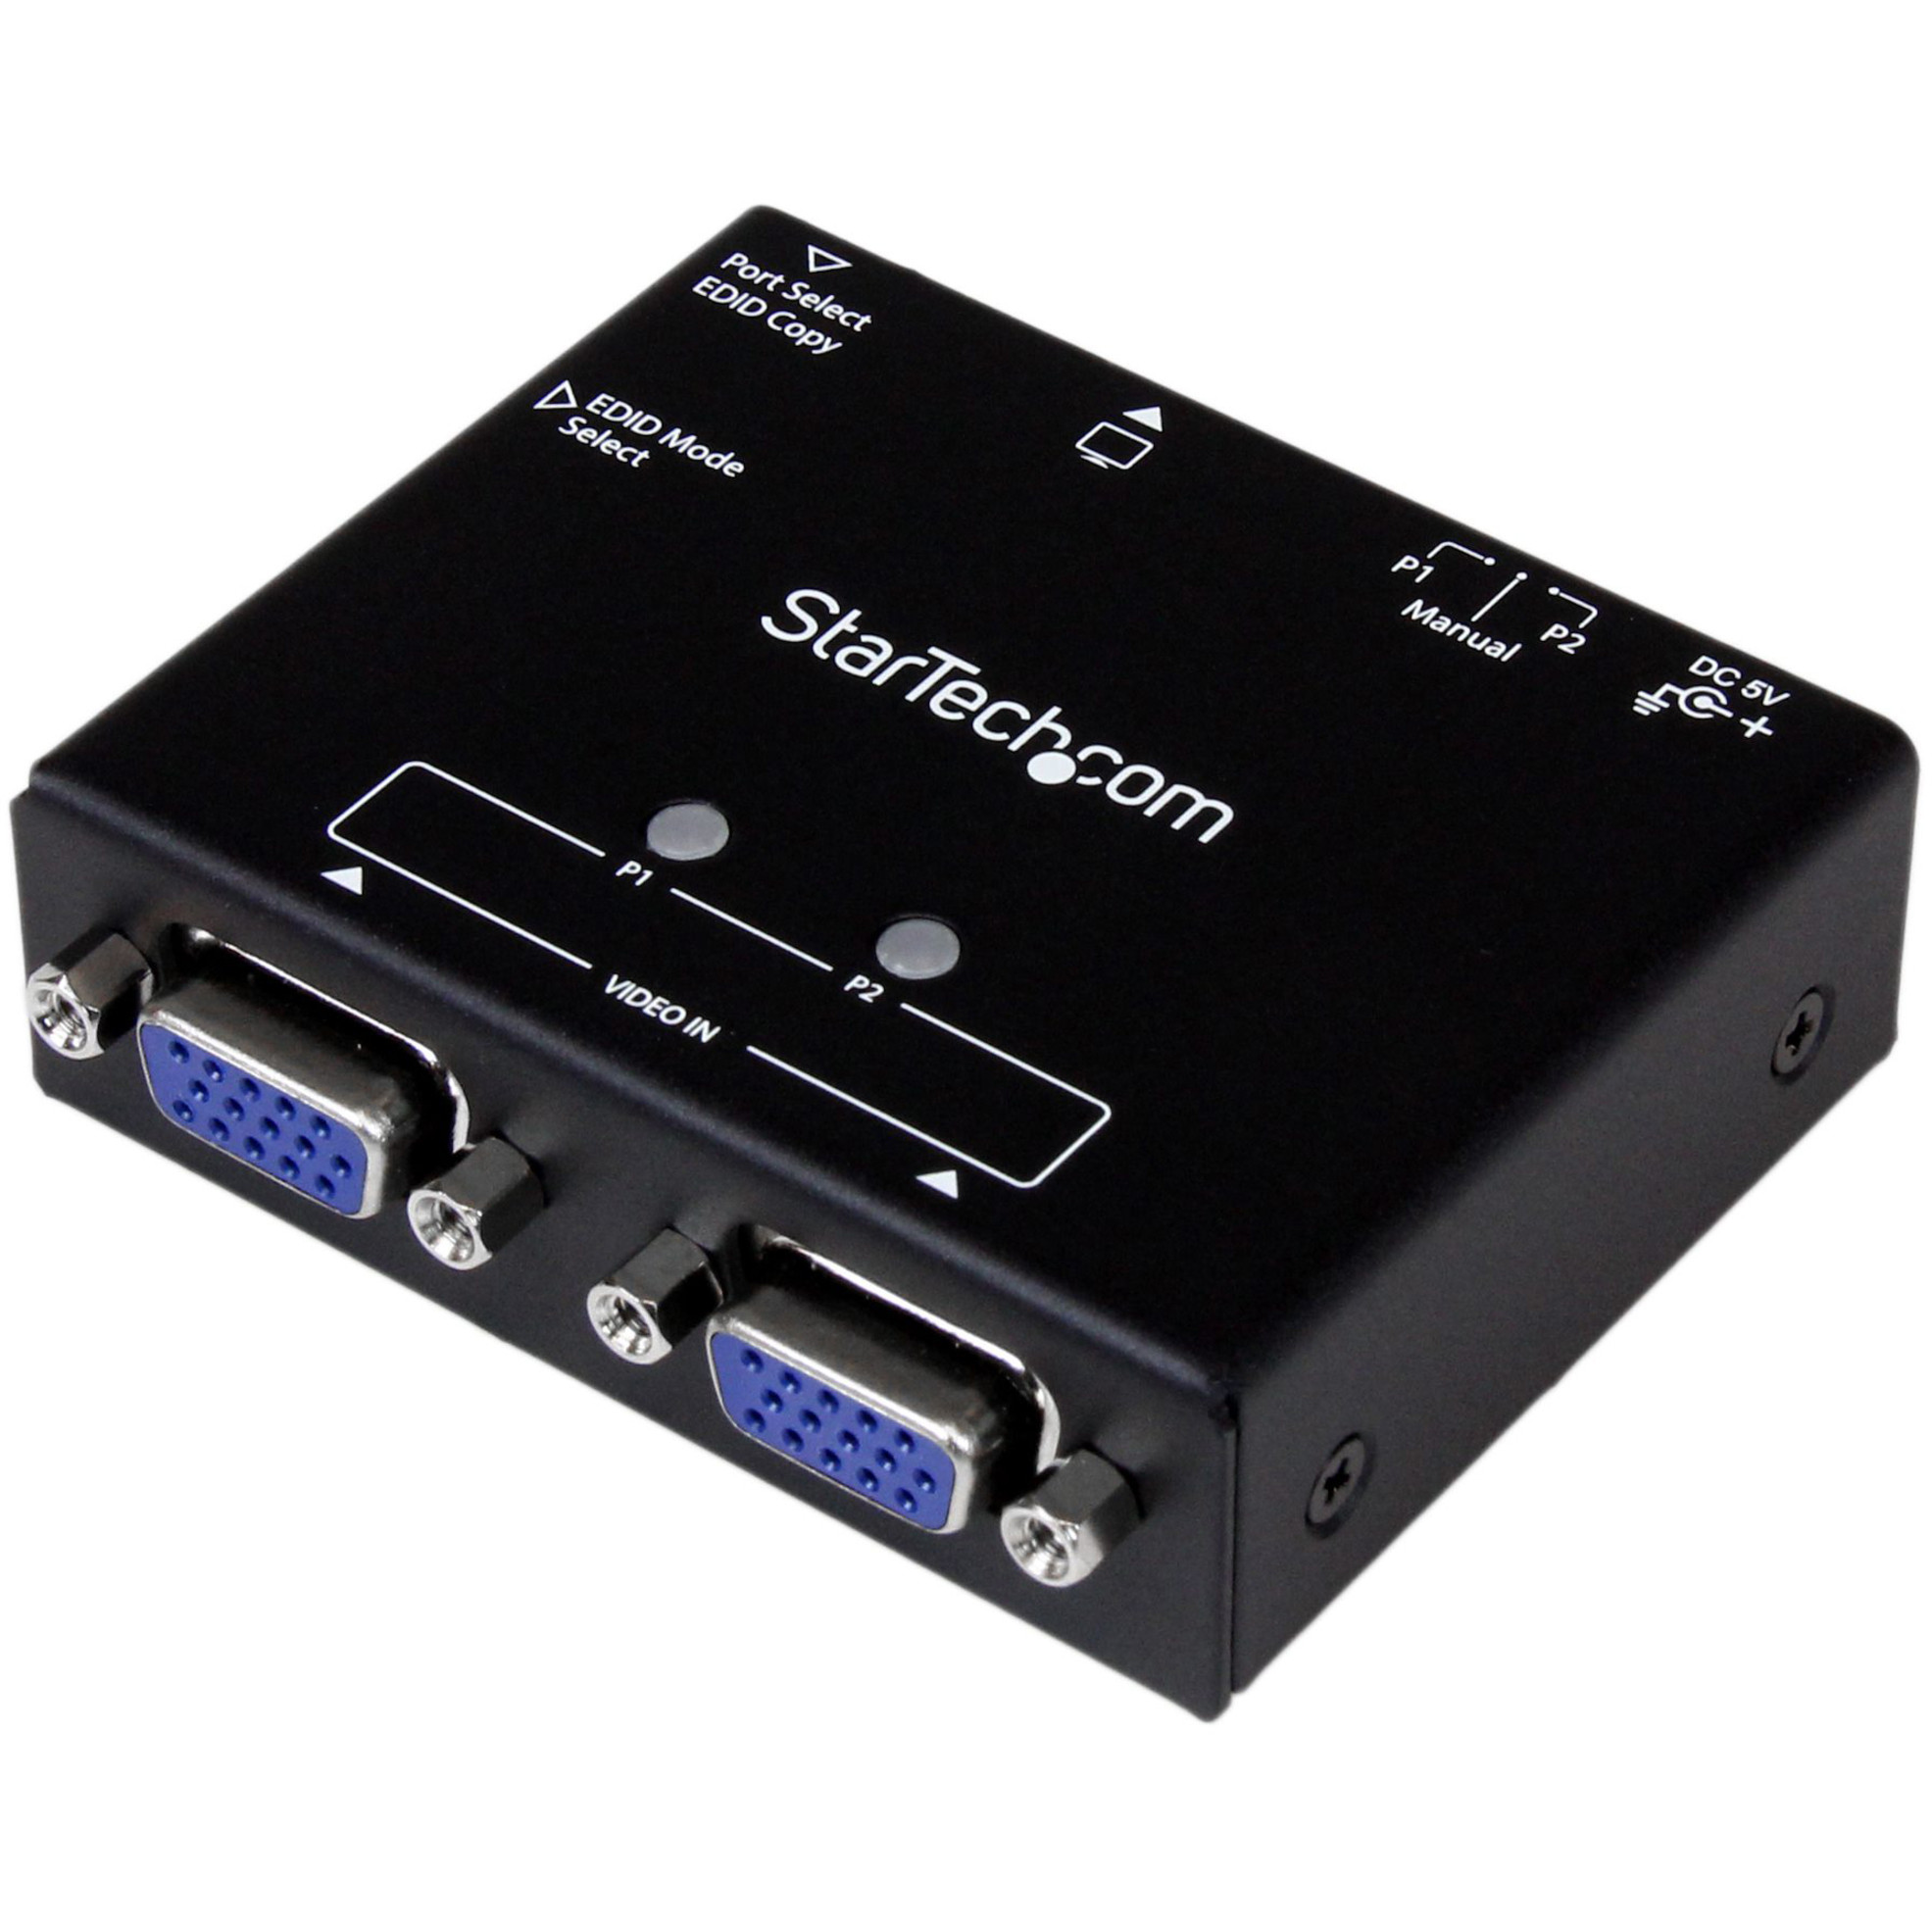 Startech .com 2-Port VGA Auto Switch Box with Priority Switching and EDID CopyShare a VGA monitor/projector between 2 VGA sources, with autom… ST122VGA